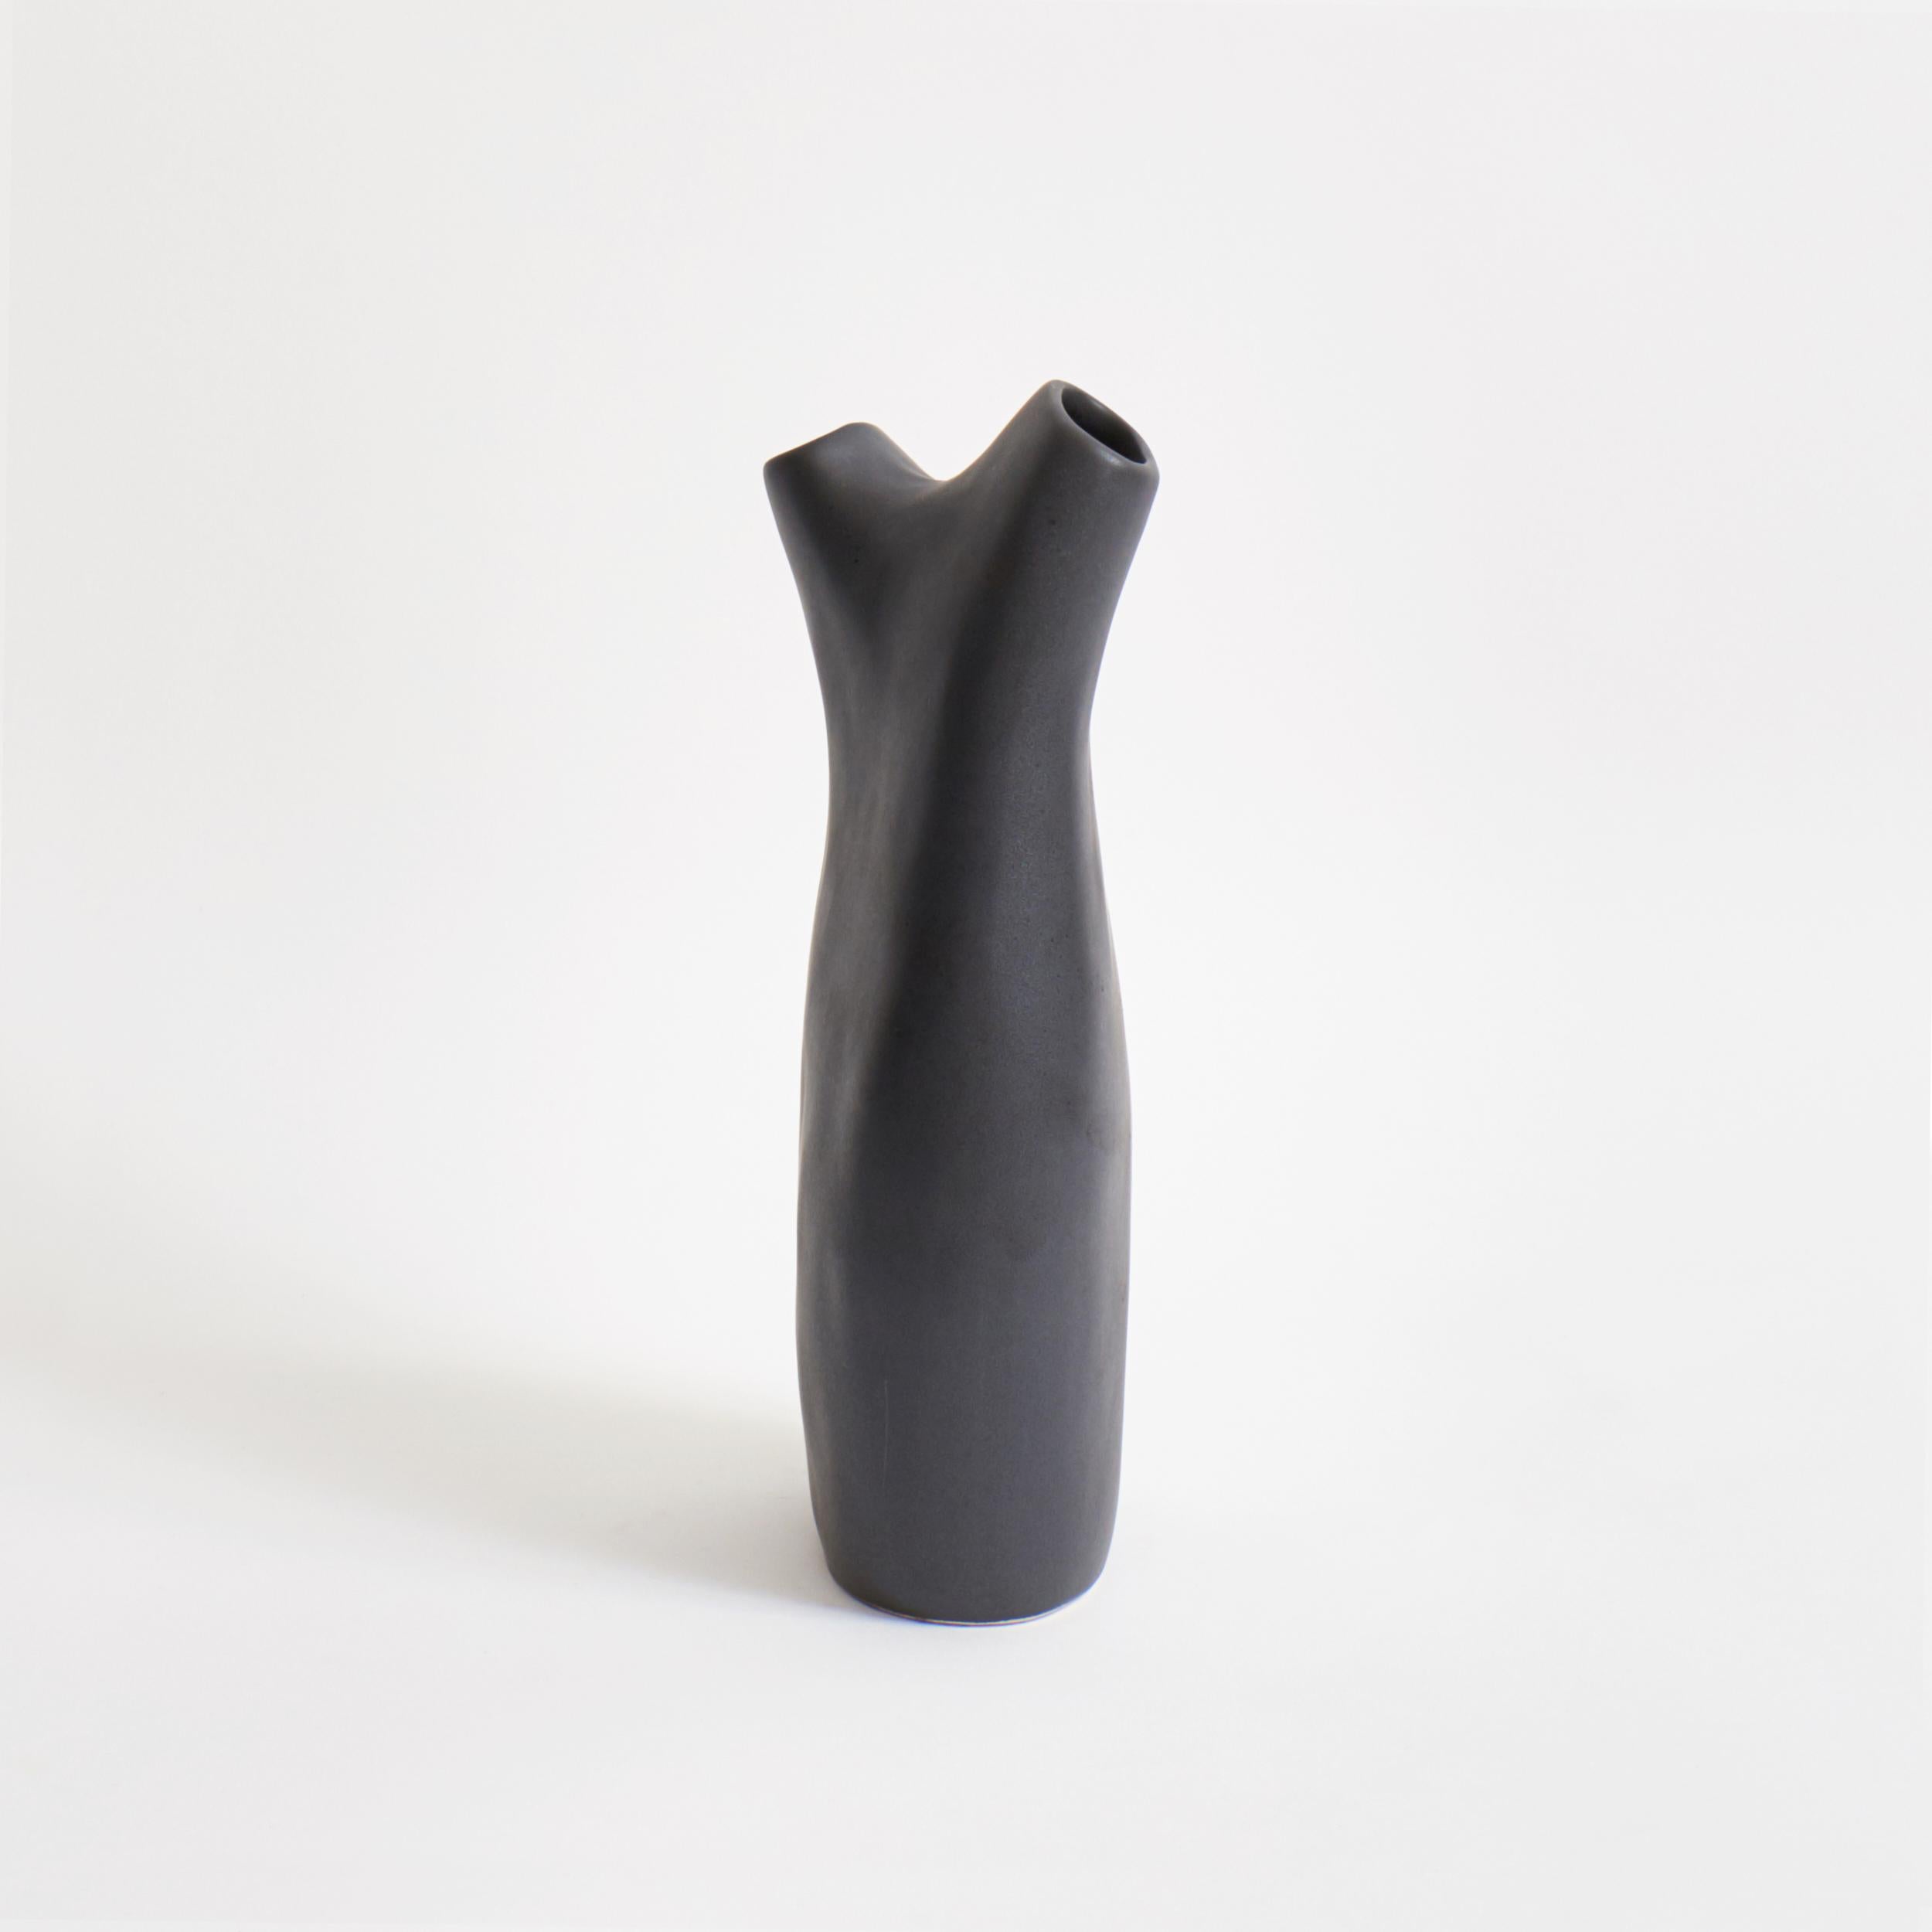 Gemini vase in Graphite
Designed by Project 213A in 2020
Handmade Stoneware

A beautiful flower arrangement can bring out the inner quality of flowers and plants, expressing emotion. This is Ikebana, the Japanese art of flower arrangement.